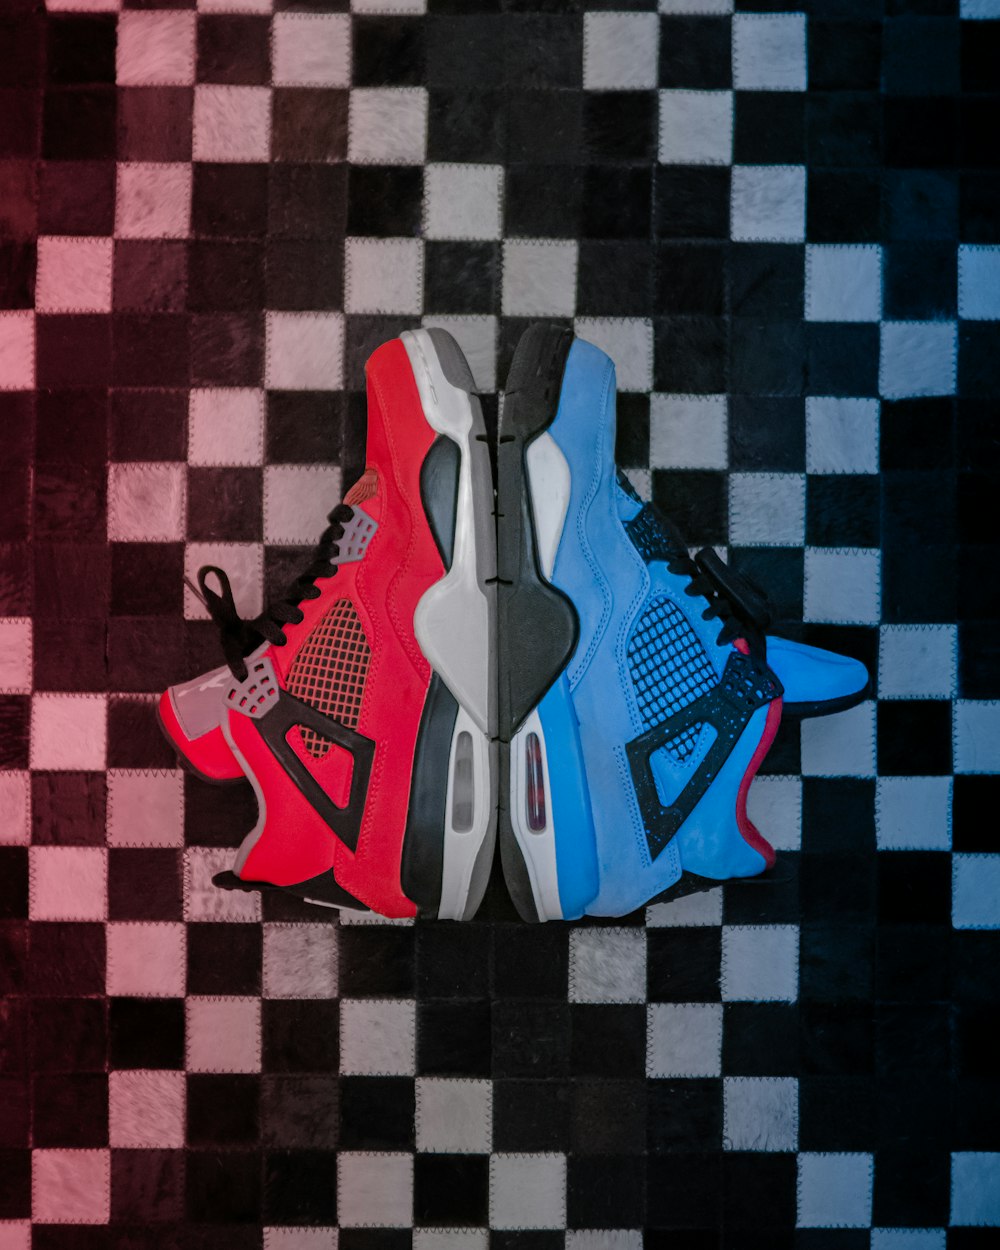 red and blue Air Jordan basketball shoes